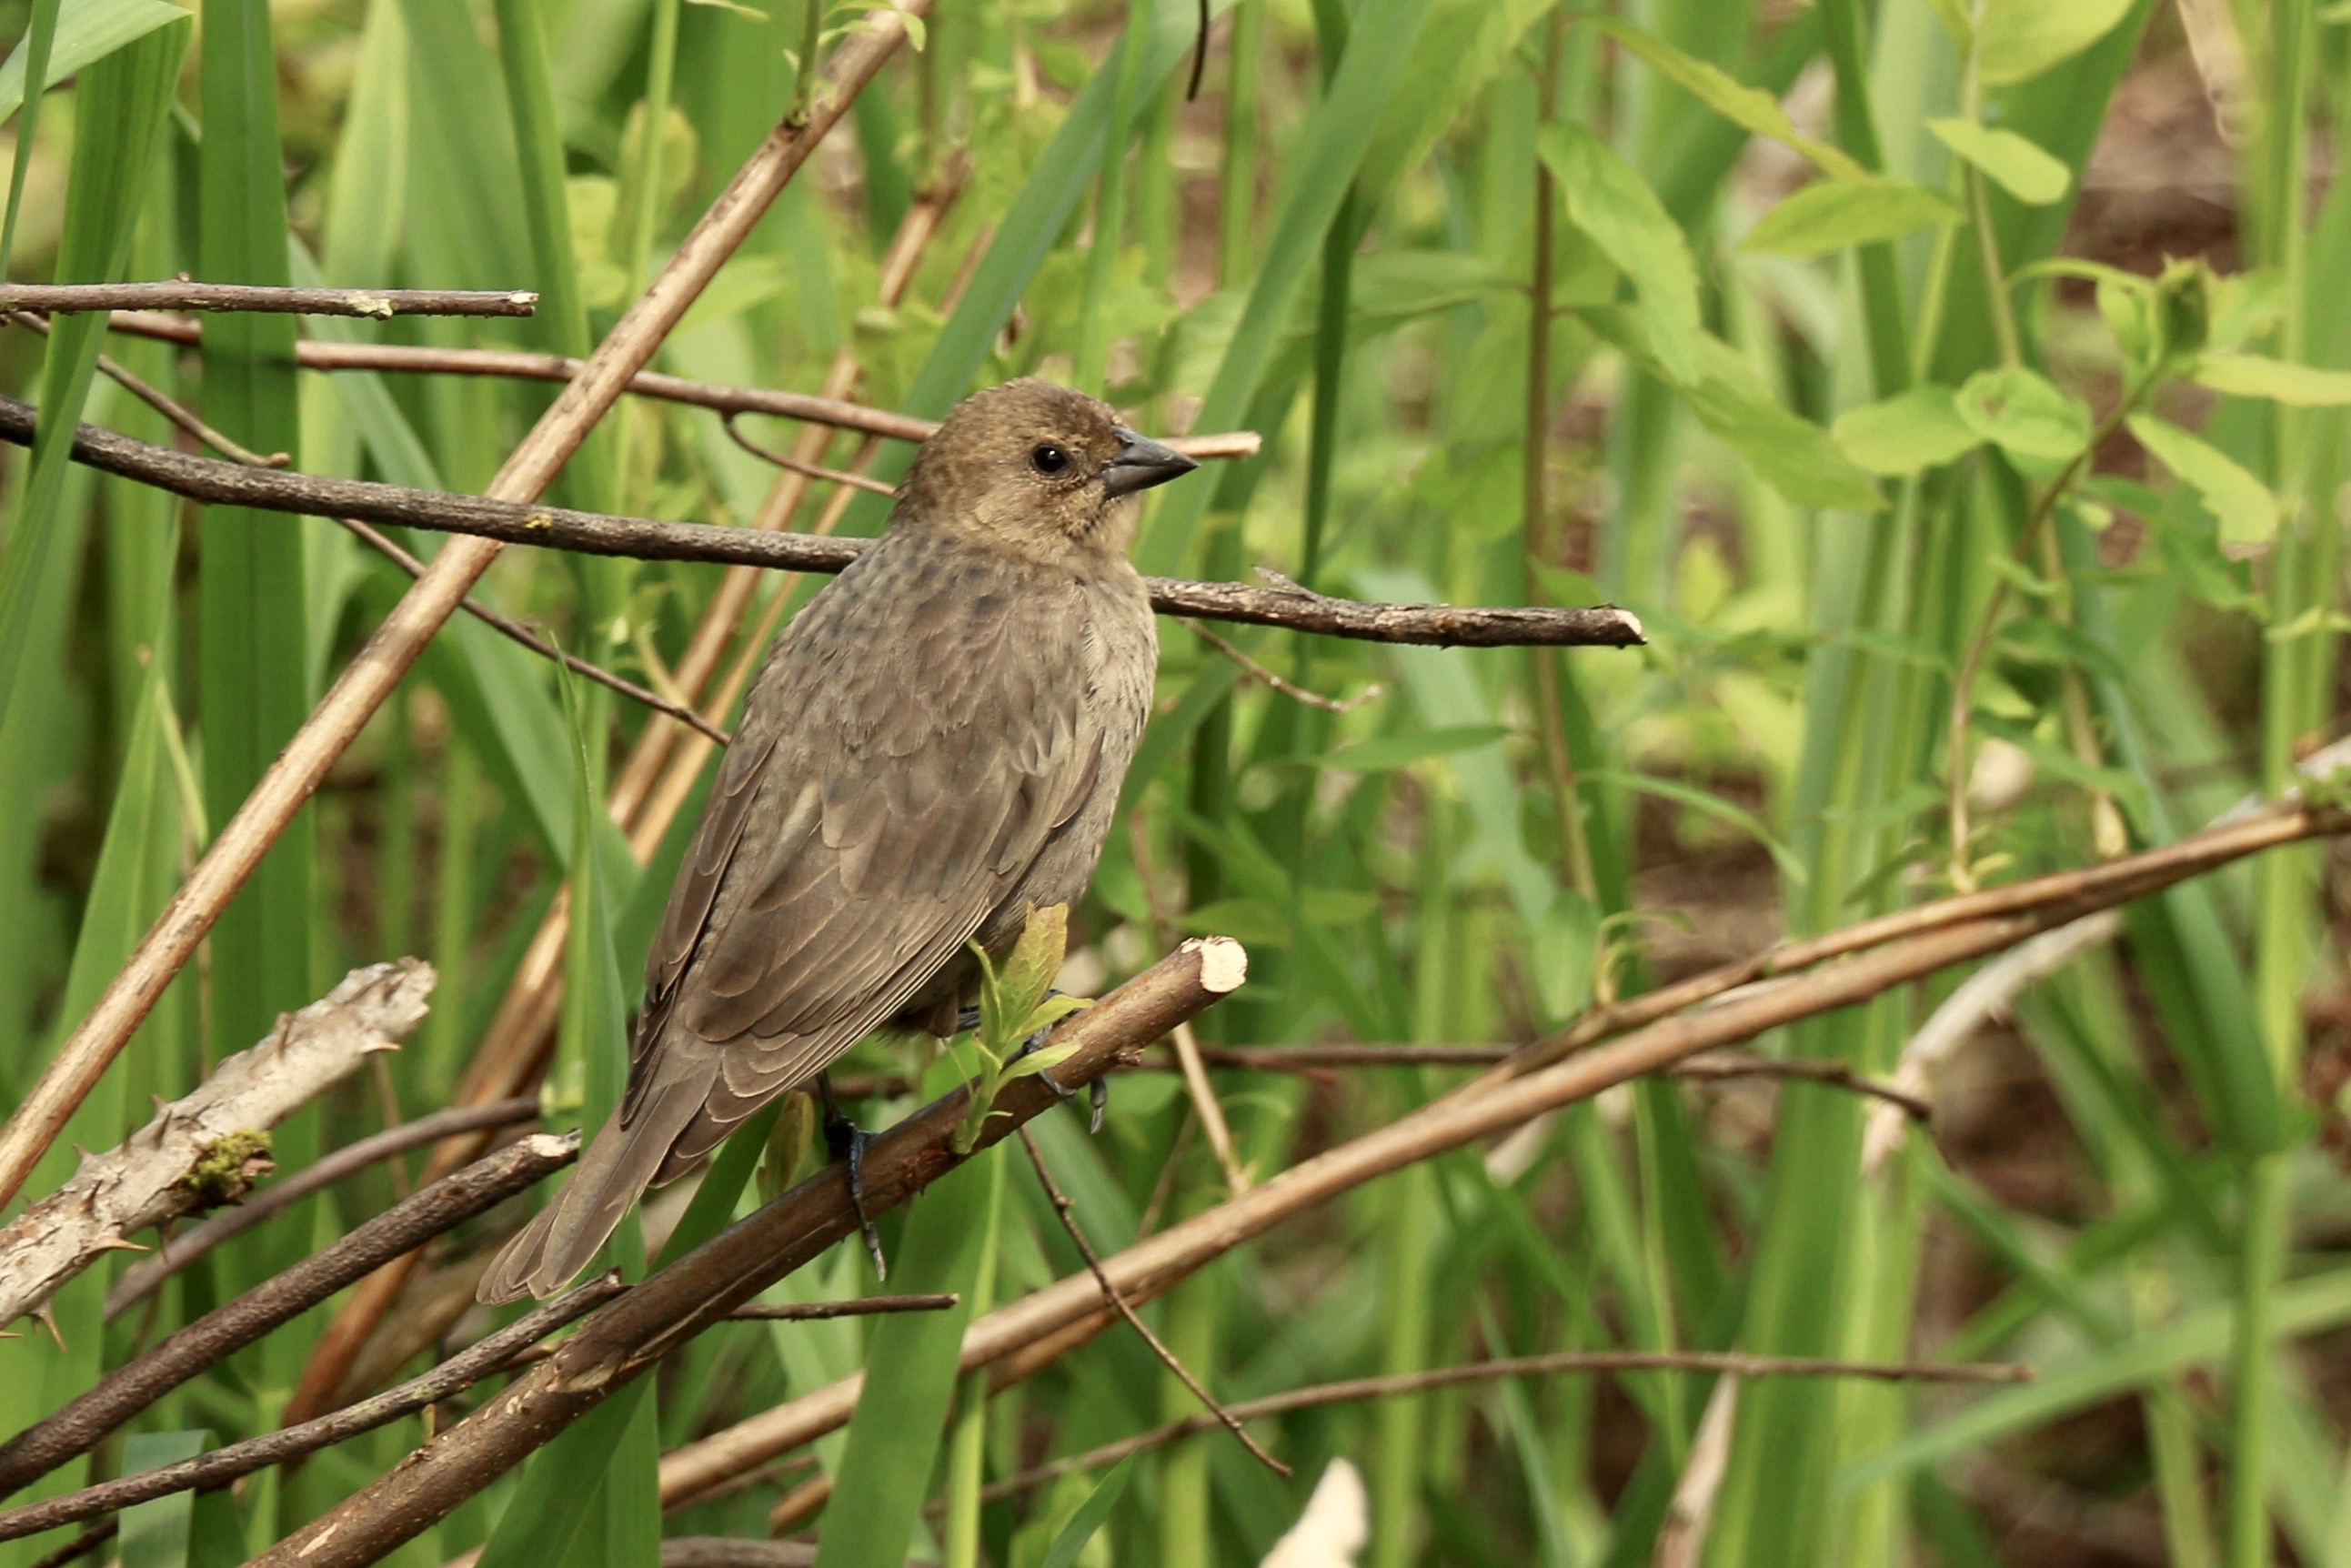 Female cowbird perched on a twig in the middle of tall grass. It's a small bird with brown, drab feathers all over its body.